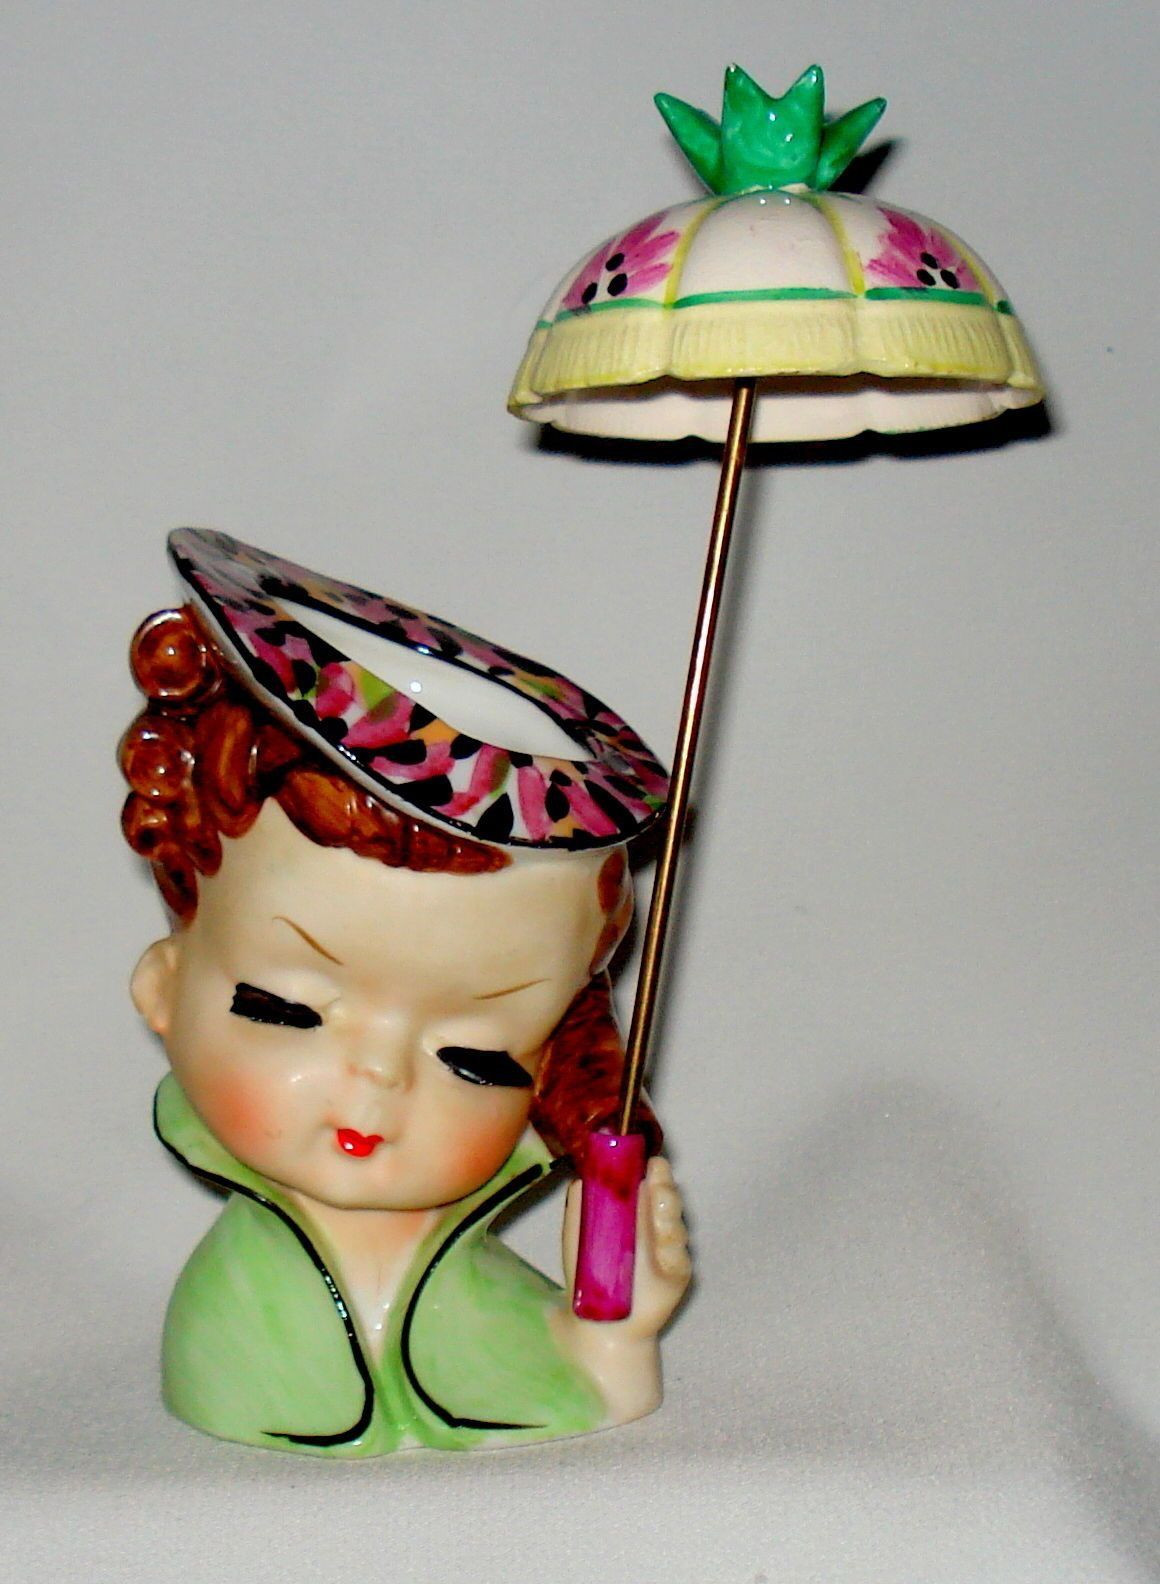 12 Fabulous Head Vases for Sale 2024 free download head vases for sale of awesome 1940s 50s kitschy womans head vase planter diyretro in awesome 1940s 50s kitschy womans head vase planter